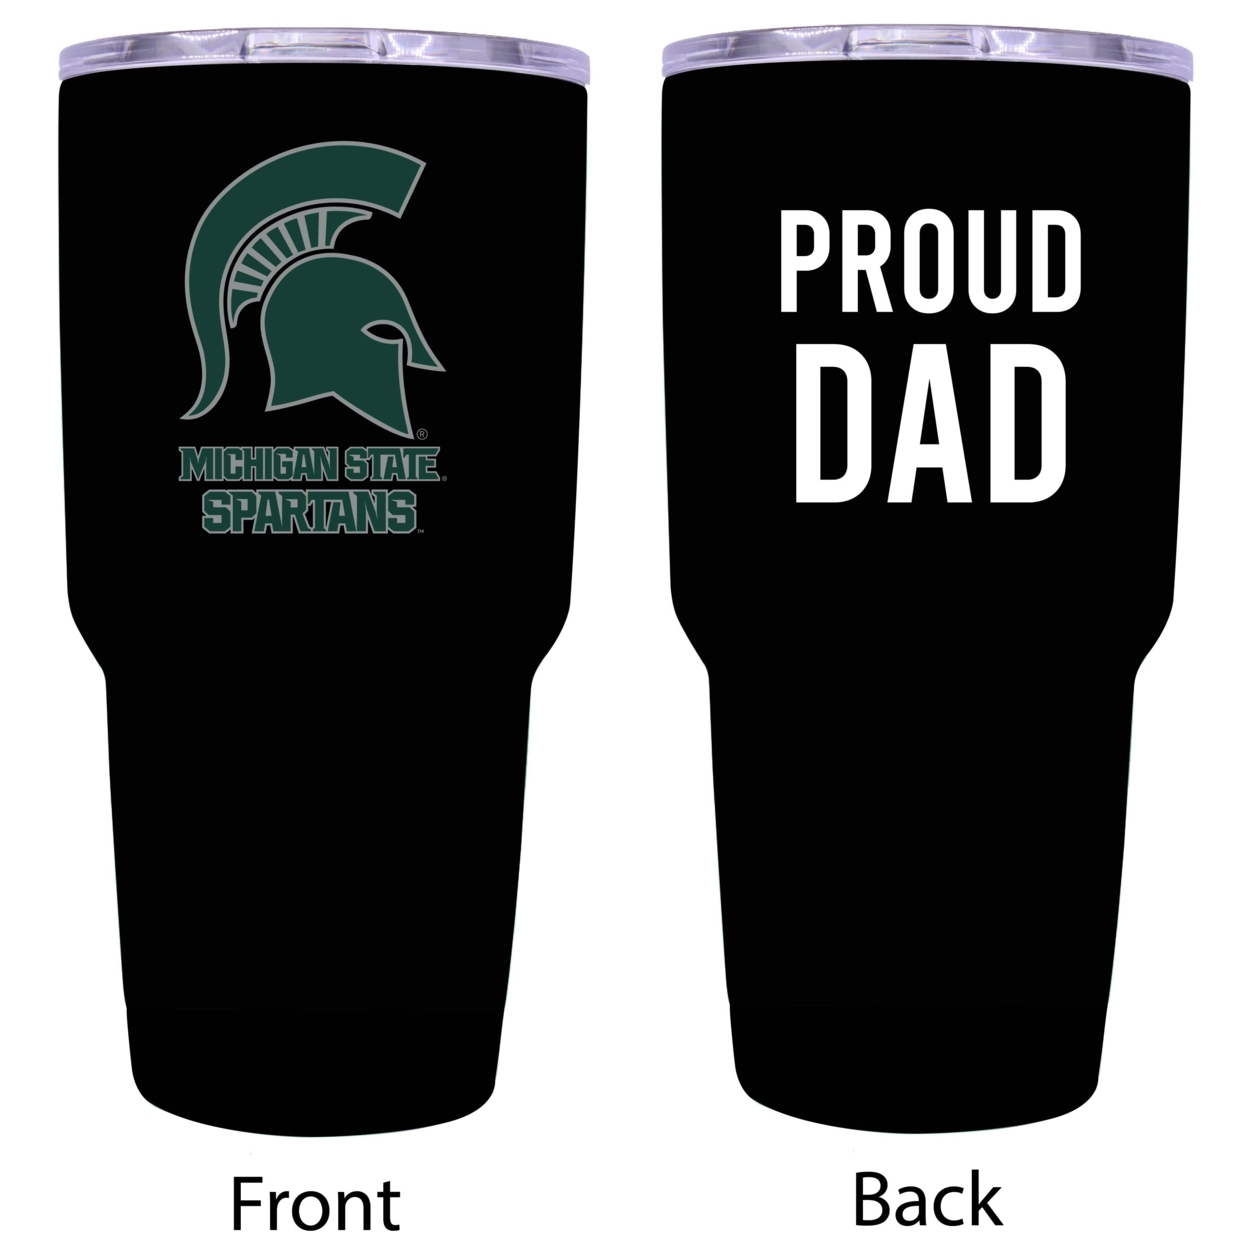 Michigan State Spartans Proud Dad 24 Oz Insulated Stainless Steel Tumbler